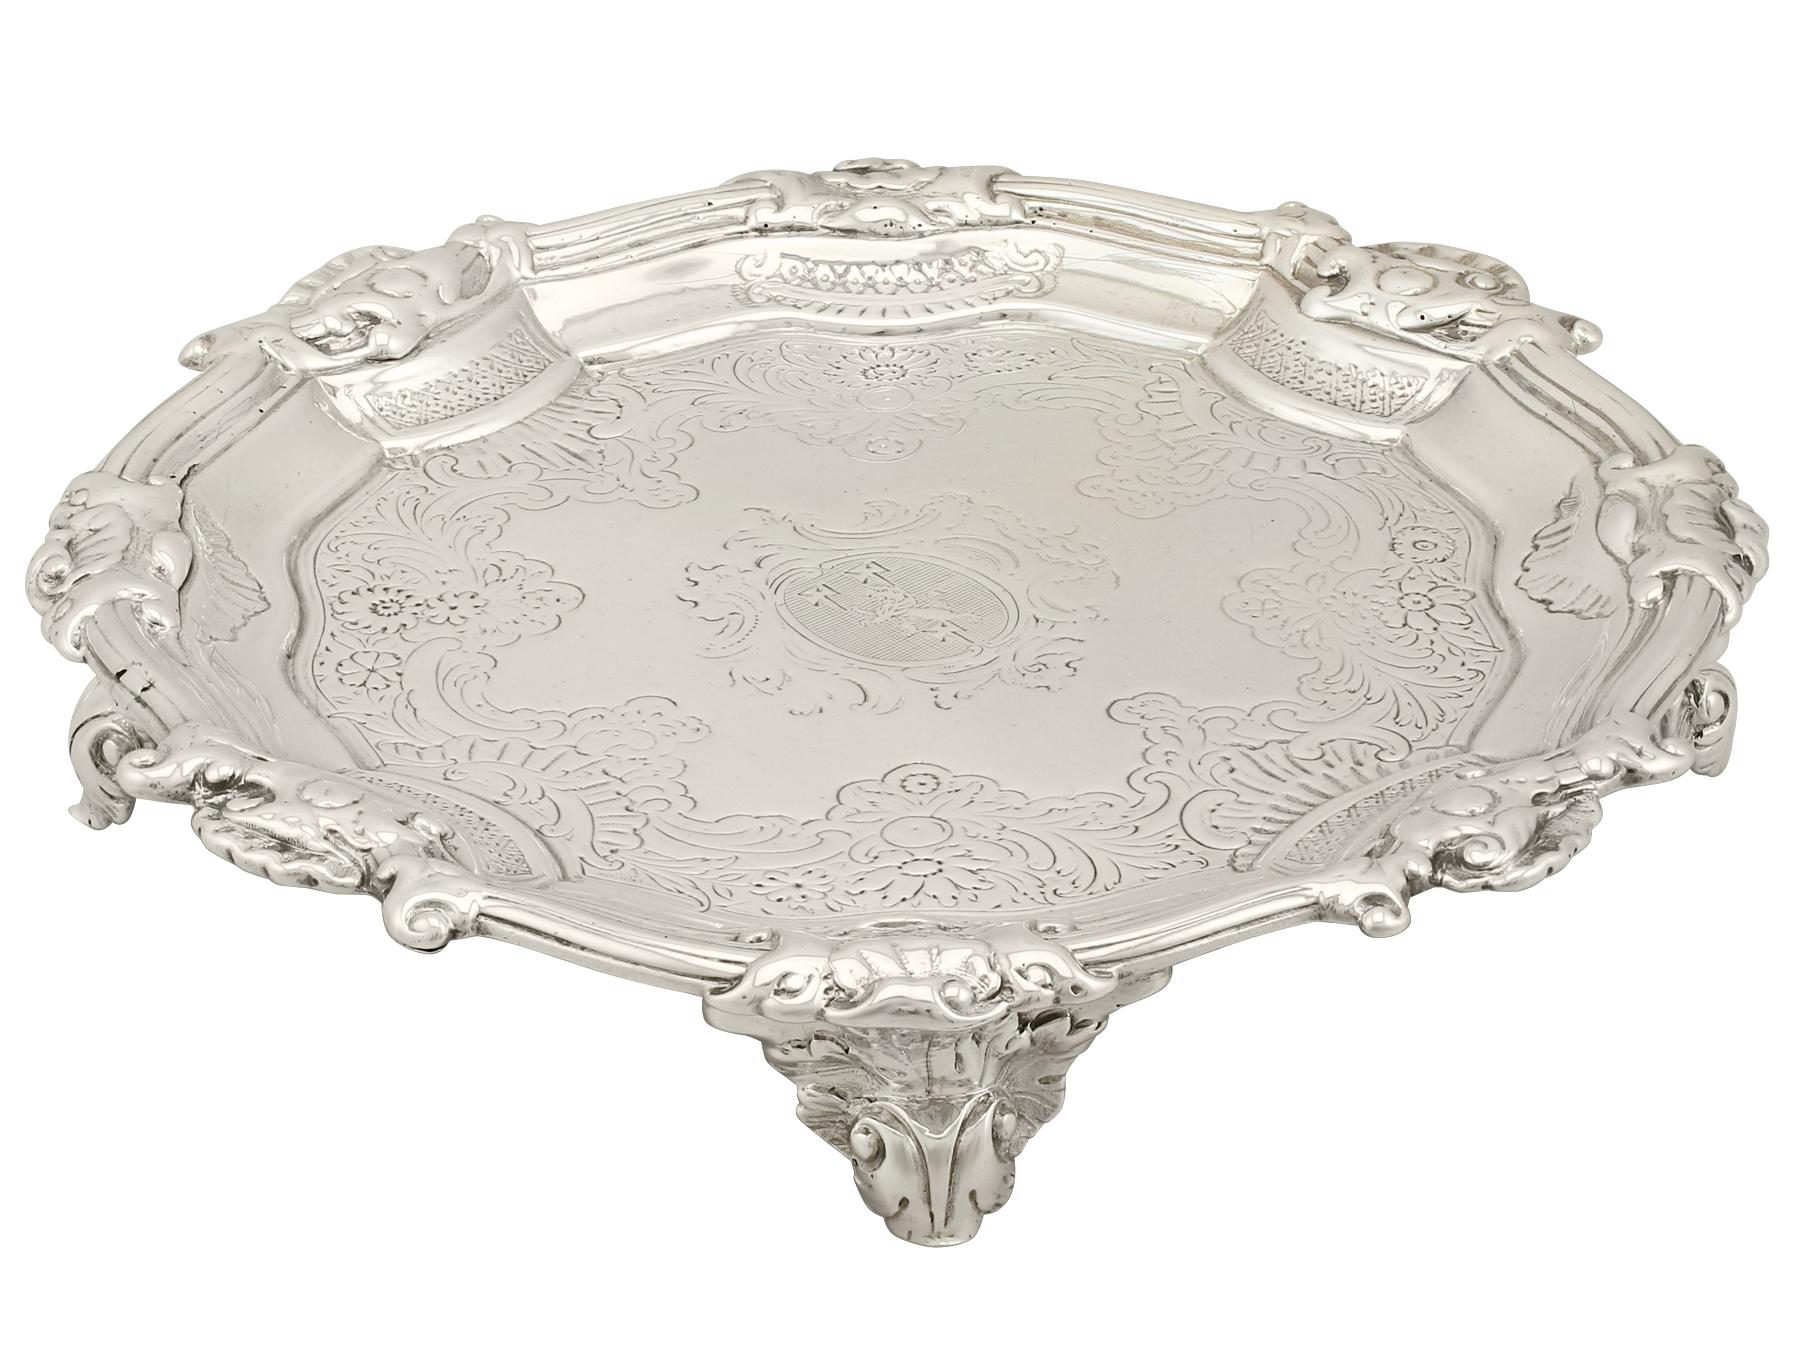 A fine and impressive antique George II English sterling silver waiter; an addition to our Georgian silverware collection.

This fine antique George II sterling silver waiter has a circular shaped form.

The surface of the well is encircled with